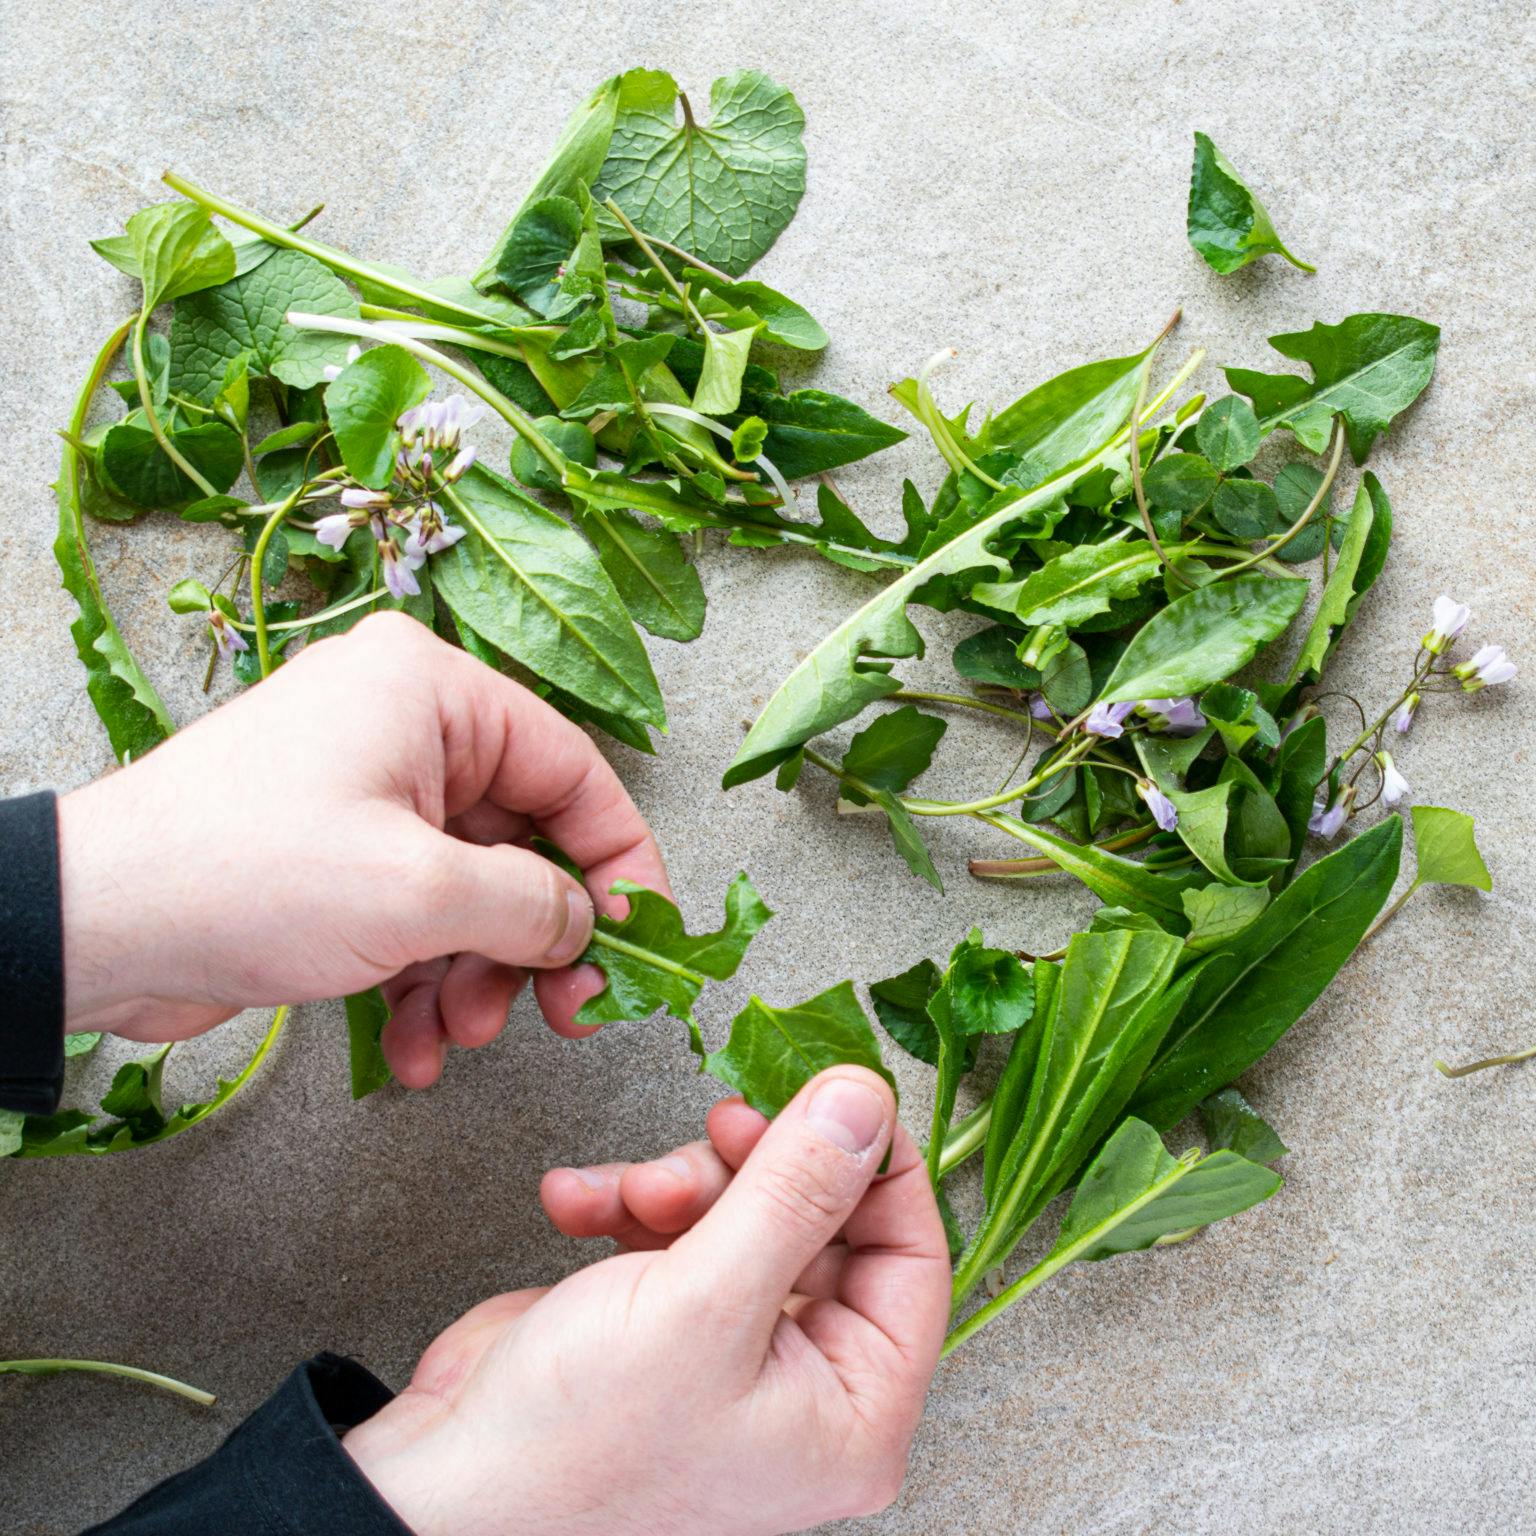 12 Wild Spring Edibles to Forage this Spring